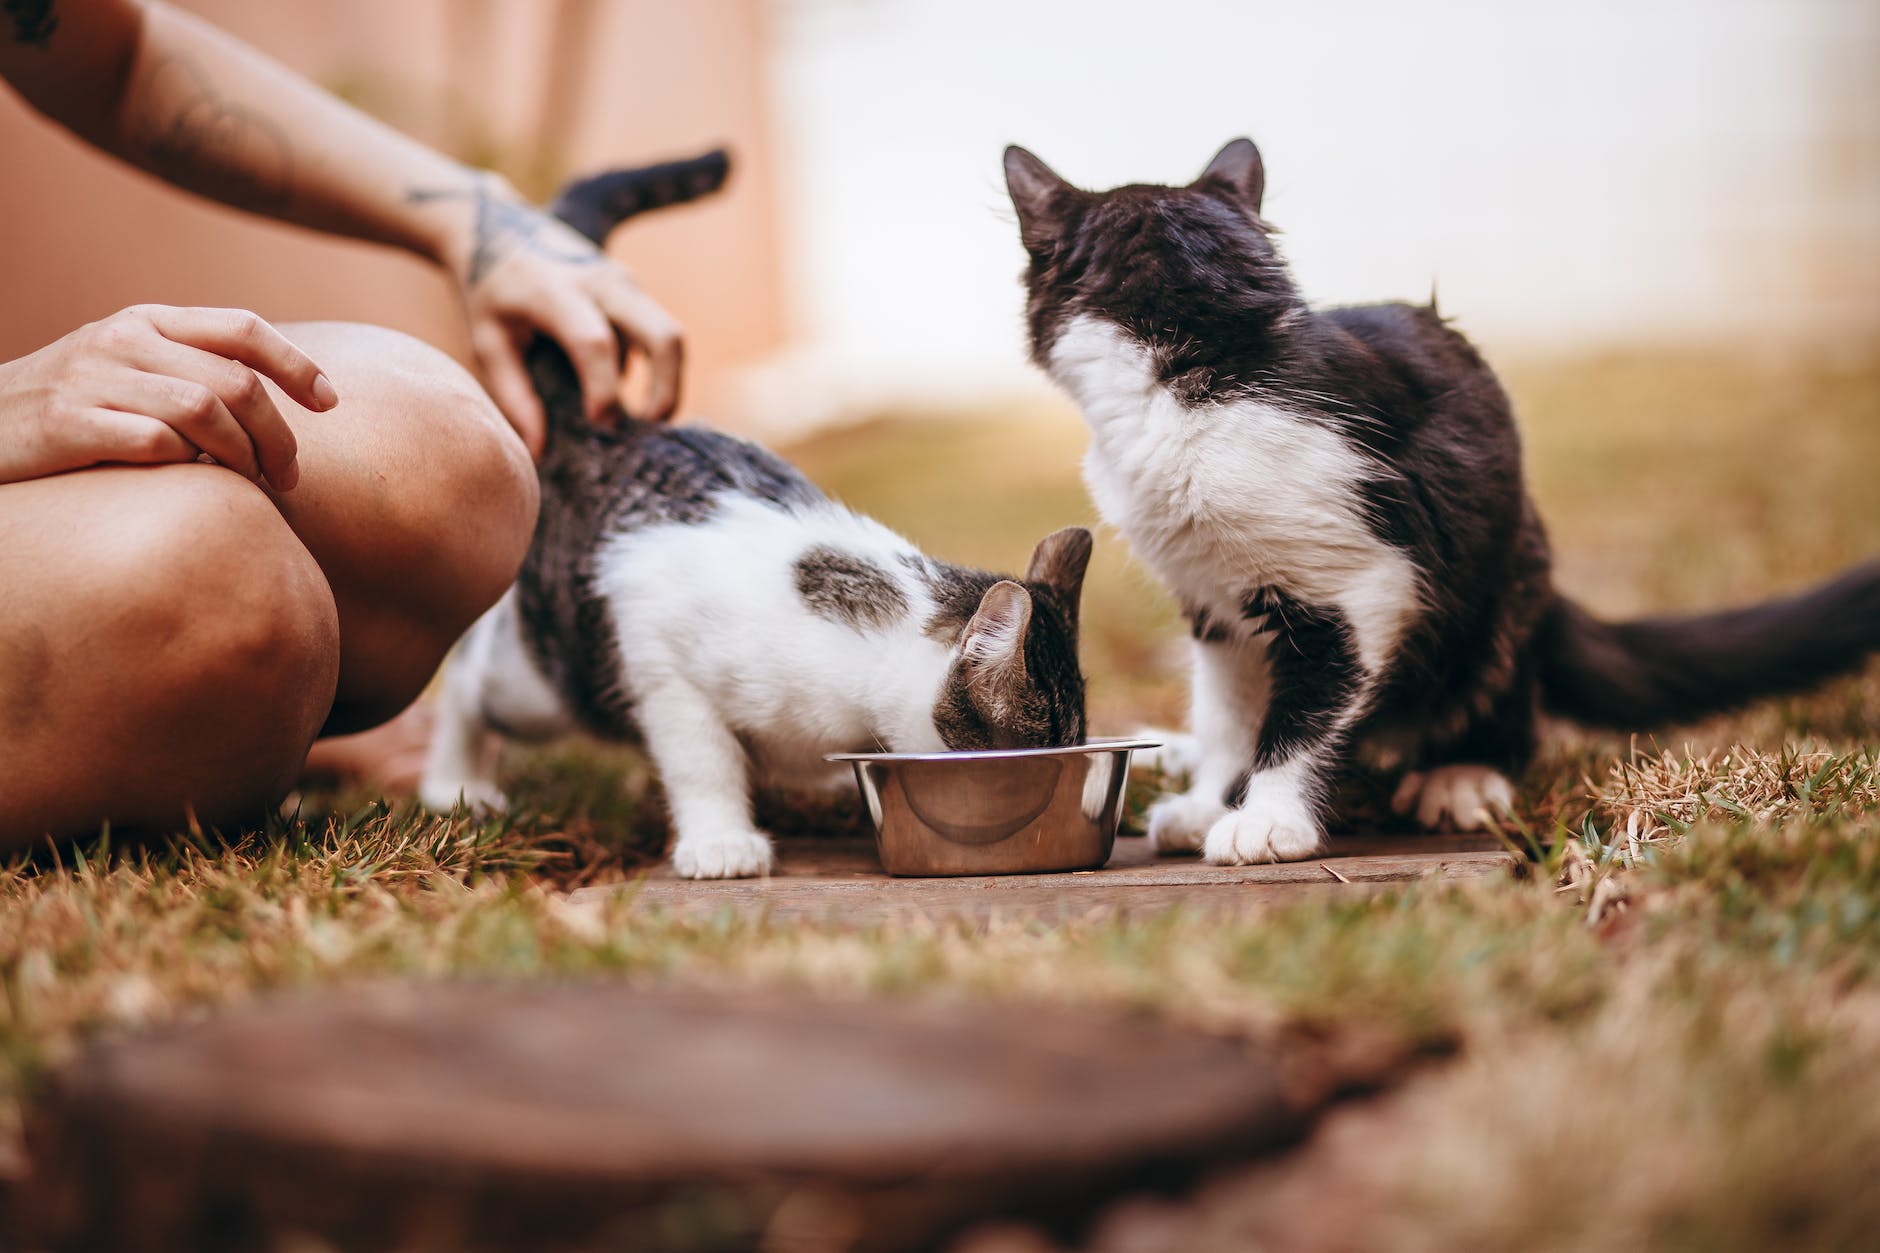 Are there any special considerations for feeding a kitty soft food?